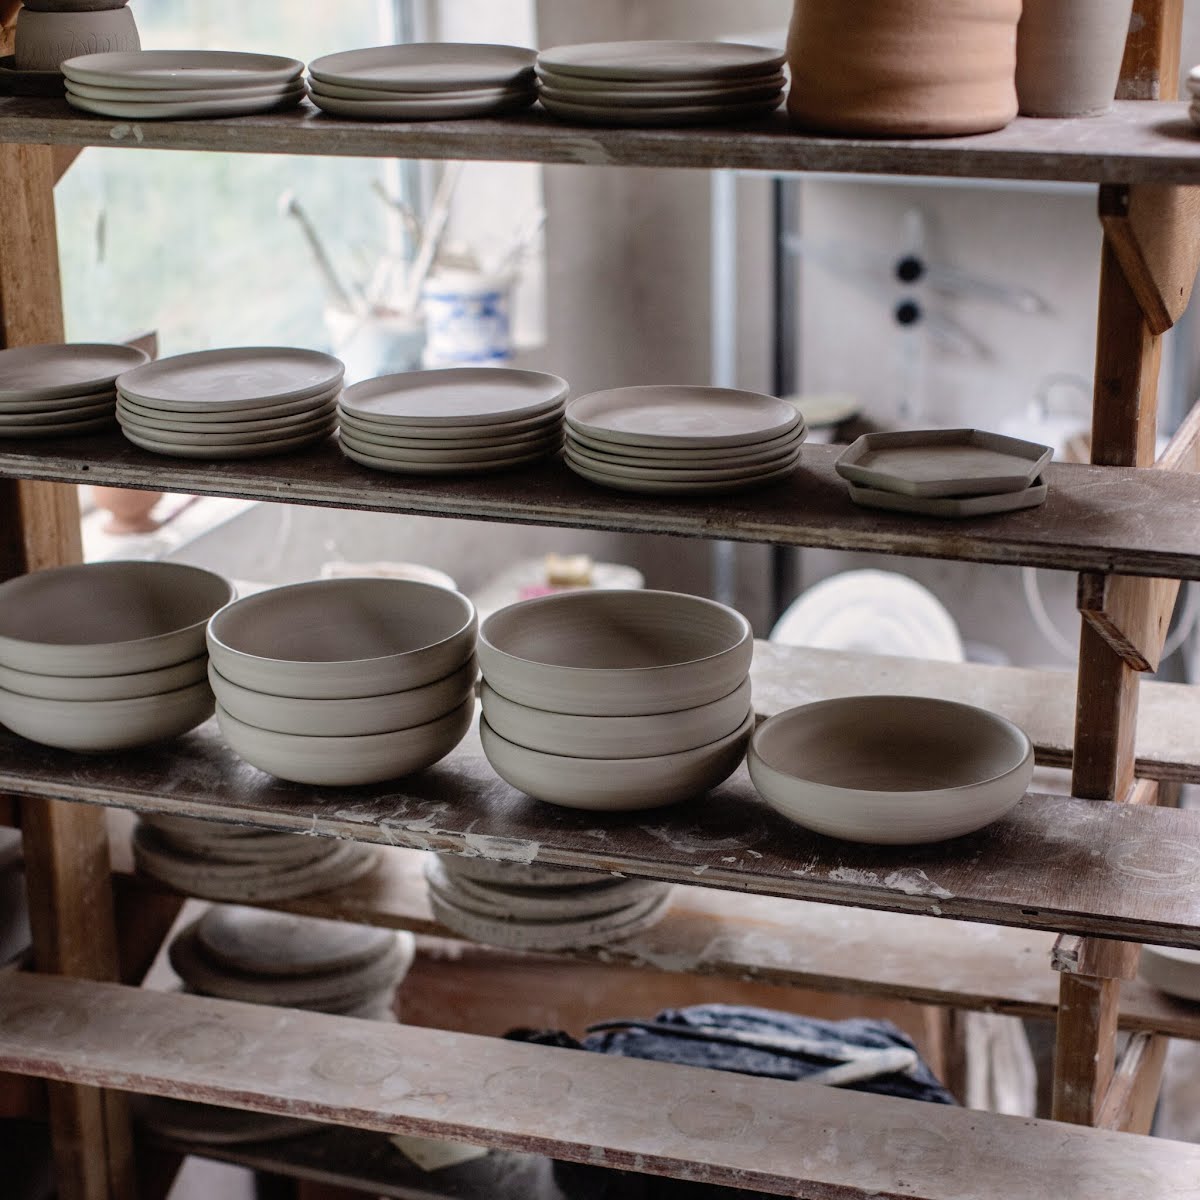 Fermoyle Pottery bowls, photographed by Al Higgins